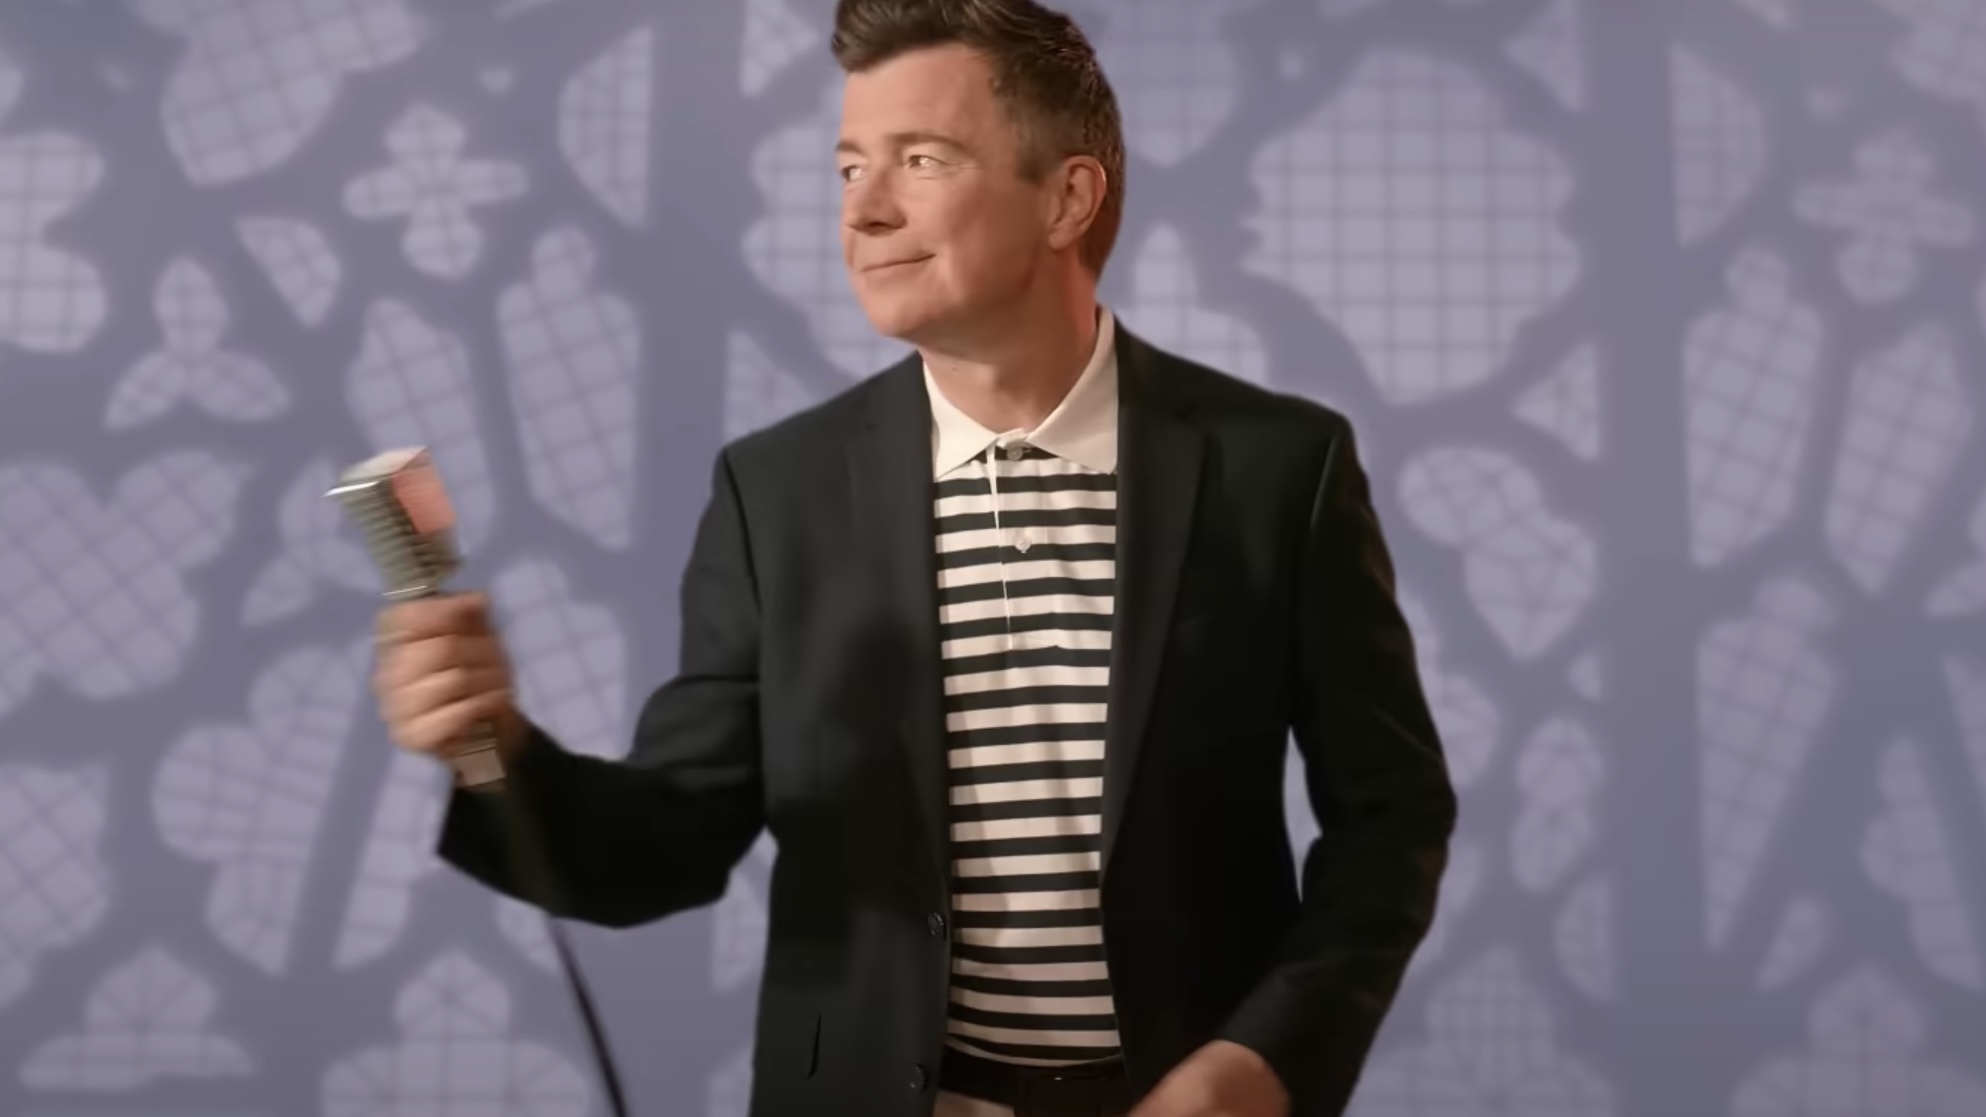 gets a video editor. New Rickroll versions imminent.